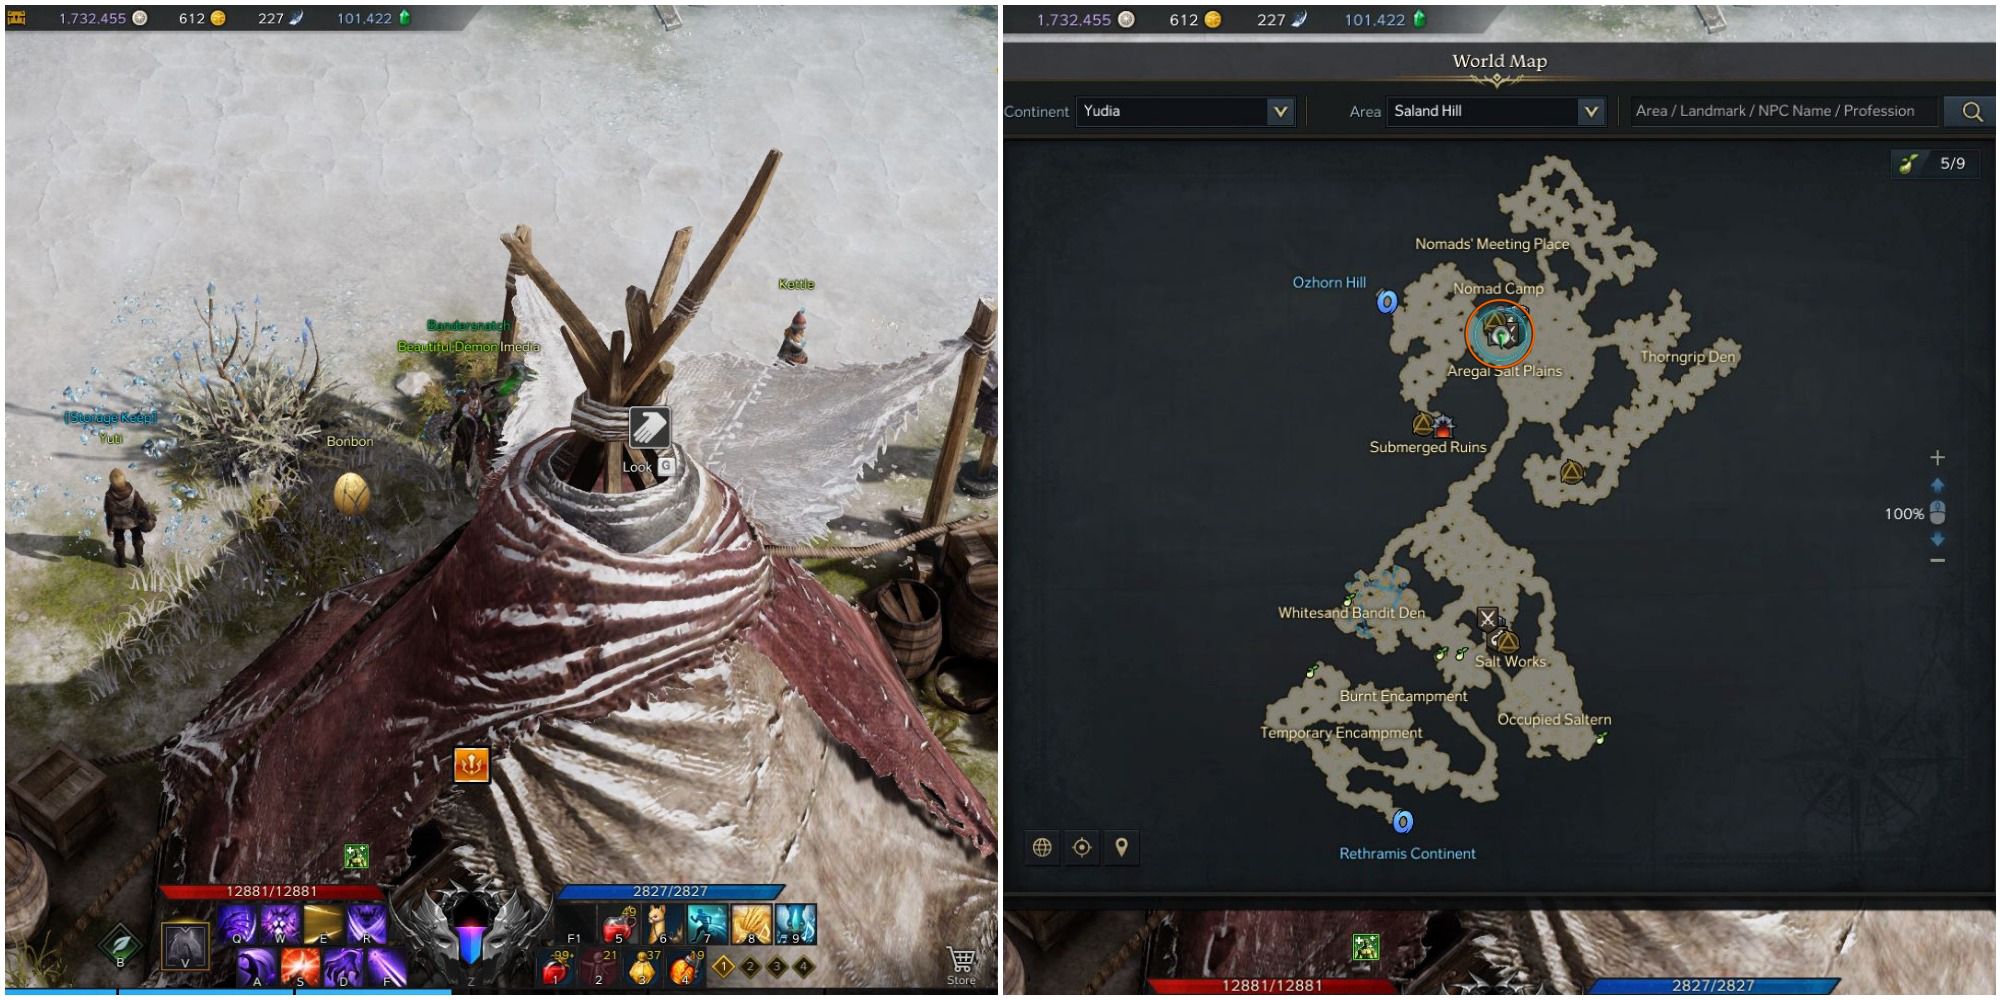 A split image of a player standing beside a tent in Nomad Camp and a map of Saland Hill